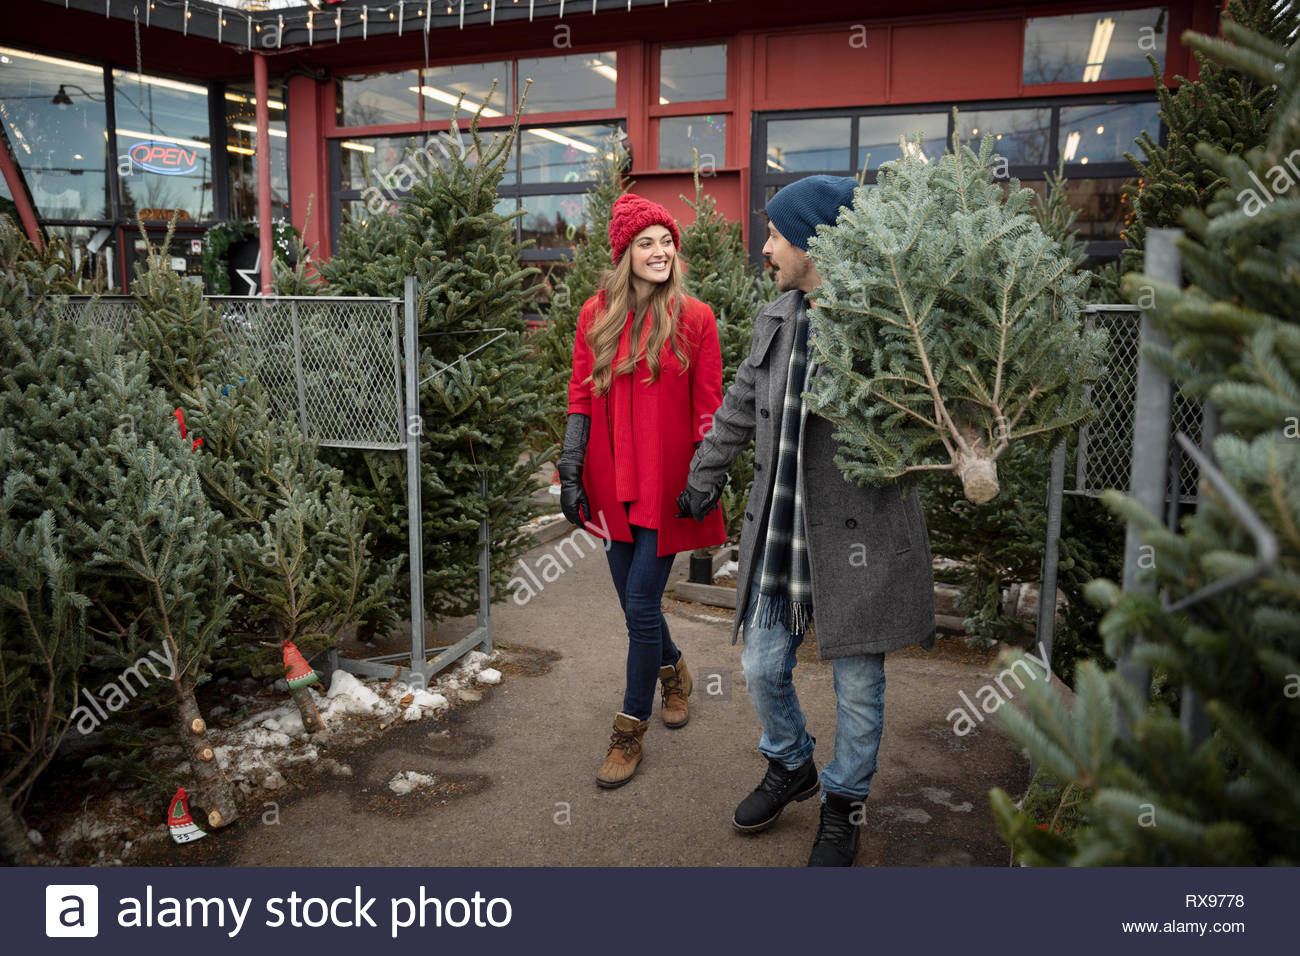 Couple carrying Christmas Tree at Christmas market Banque D'Images